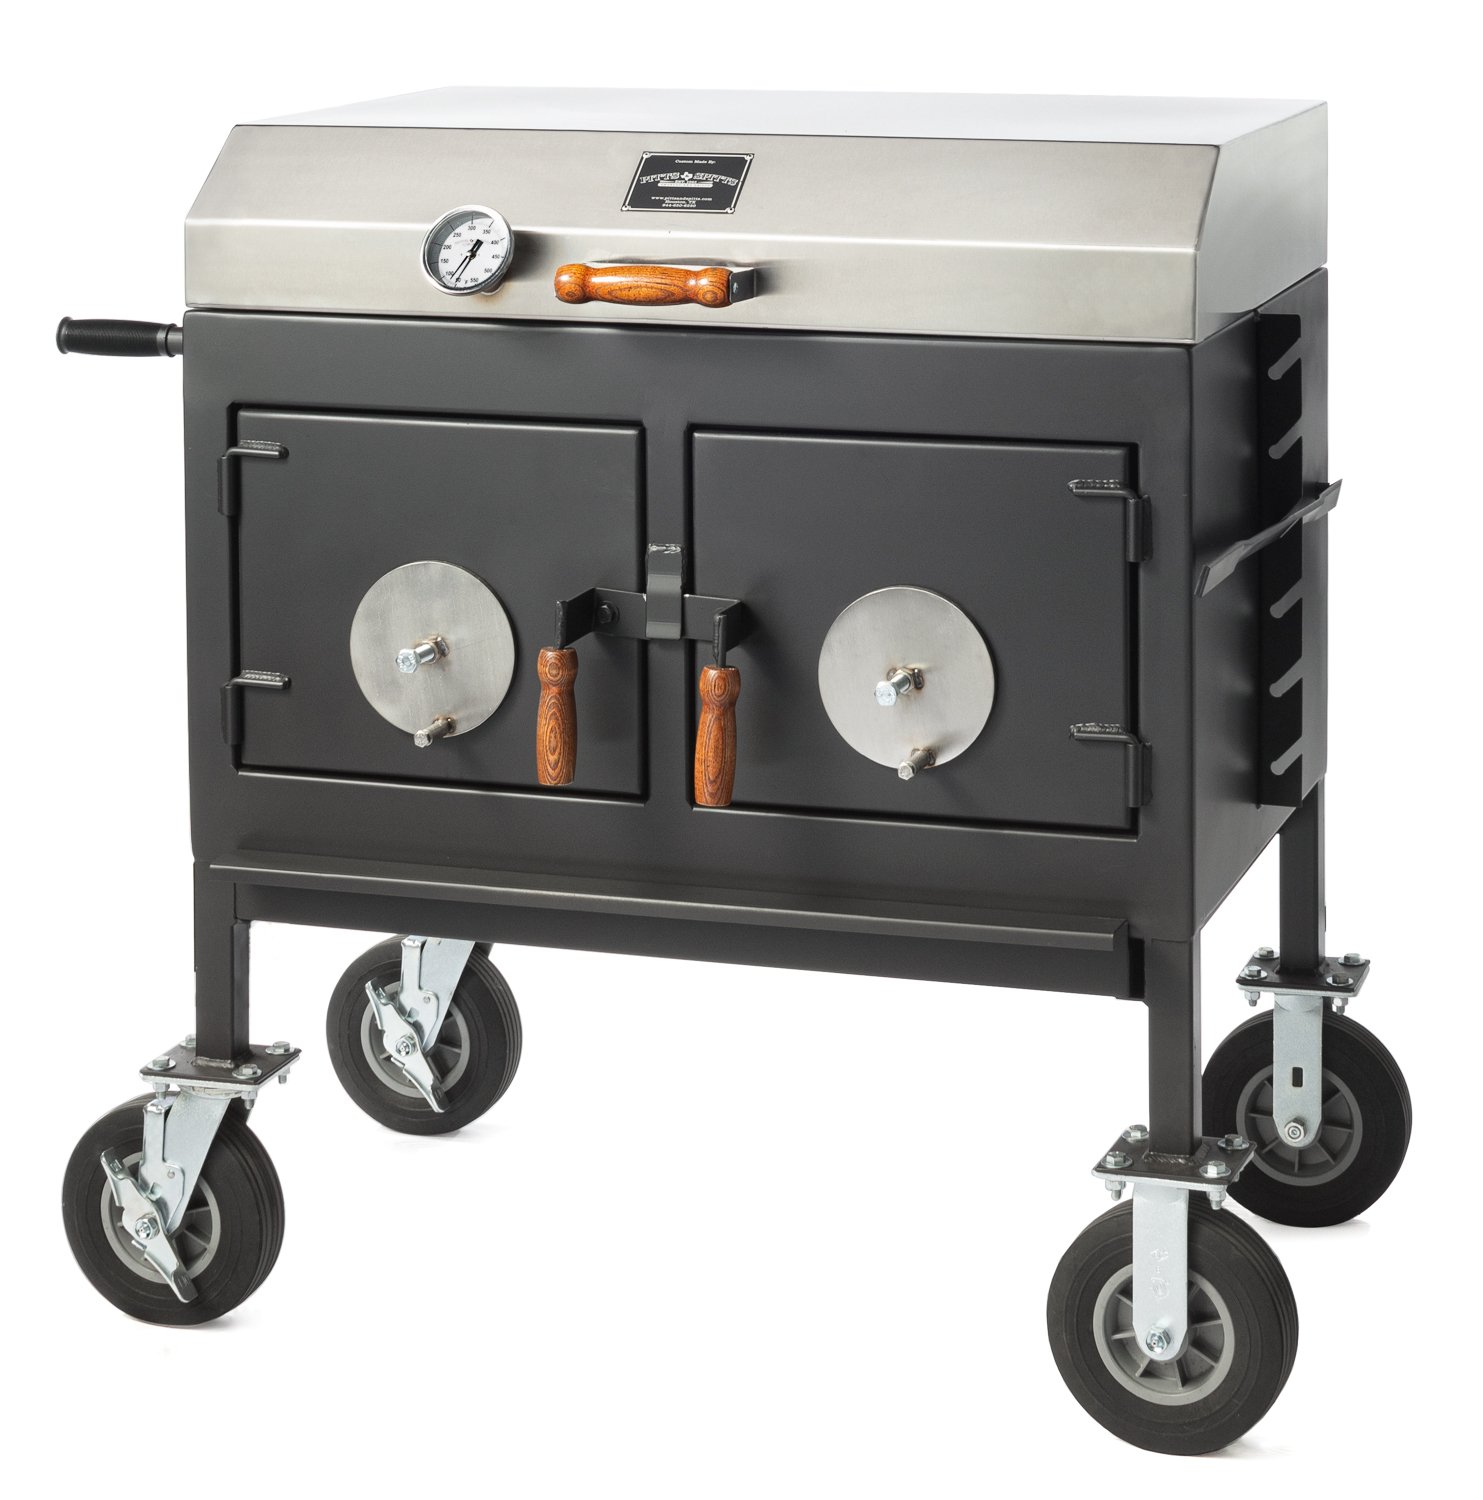 Flattop Adjustable Charcoal Grill - Pitts & Spitts